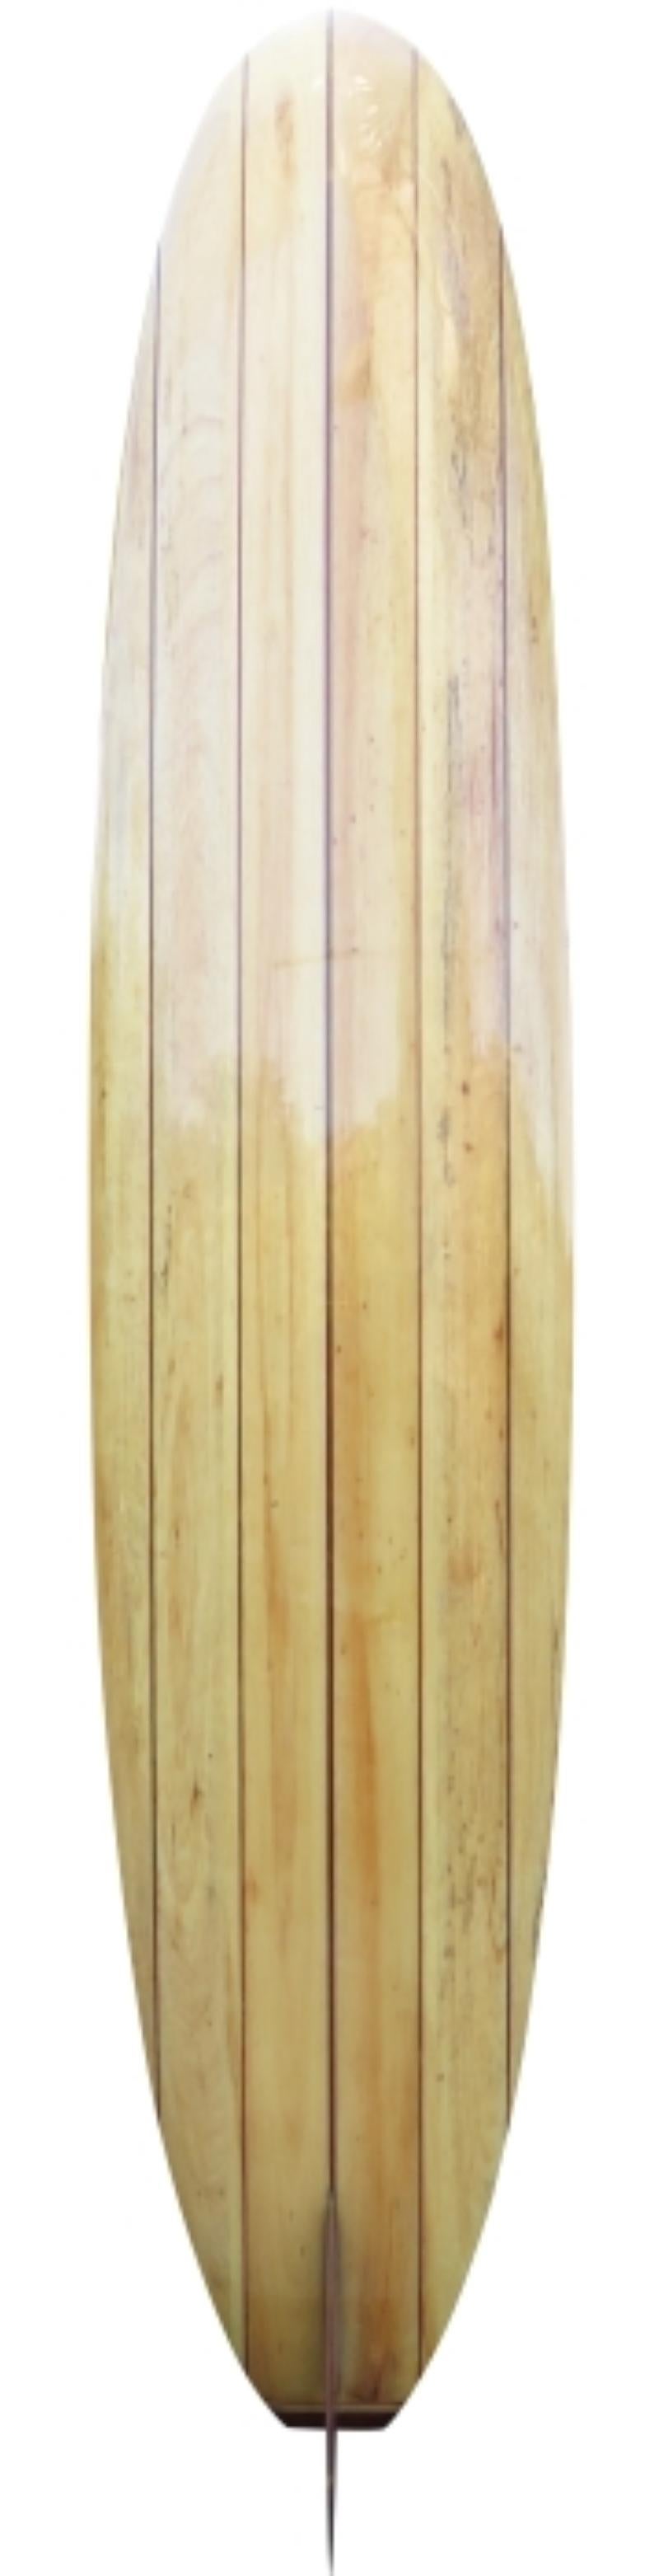 Mid-1990s Velzy balsawood longboard shaped by the late Dale Velzy (1927-2005). Features a 5-stringer design with gorgeous wood fin and tail-block. A superb example of Dale Velzy shaped balsa surfboard and beautiful functional art piece.

Velzy is